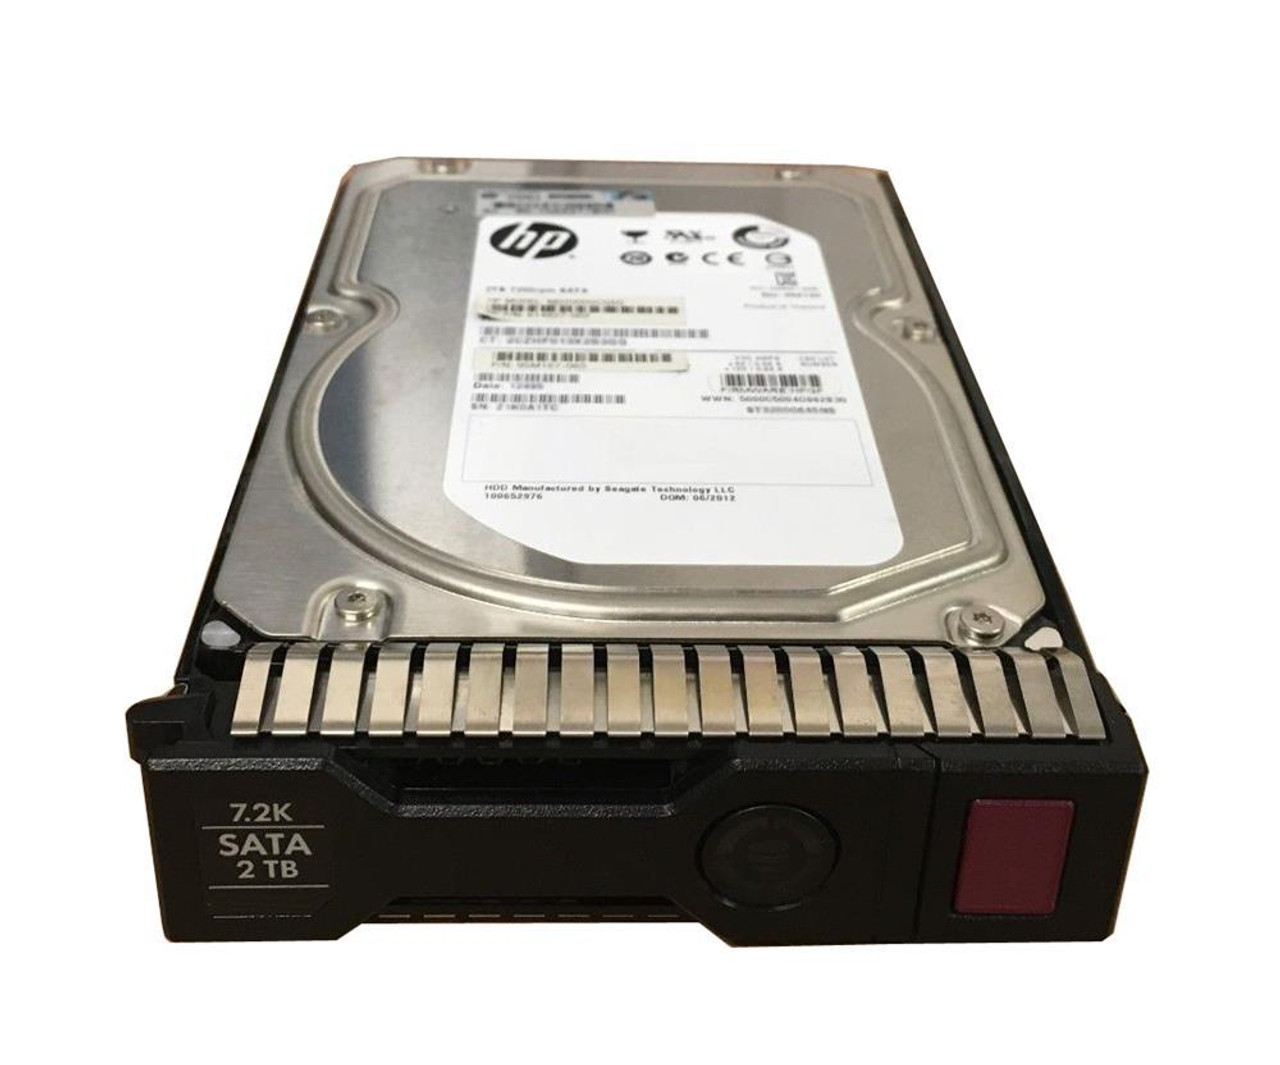 R3T25A HPE 2TB 7200RPM SATA 6Gbps 3.5-inch Internal Hard Drive with Smart Carrier (4-Pack)